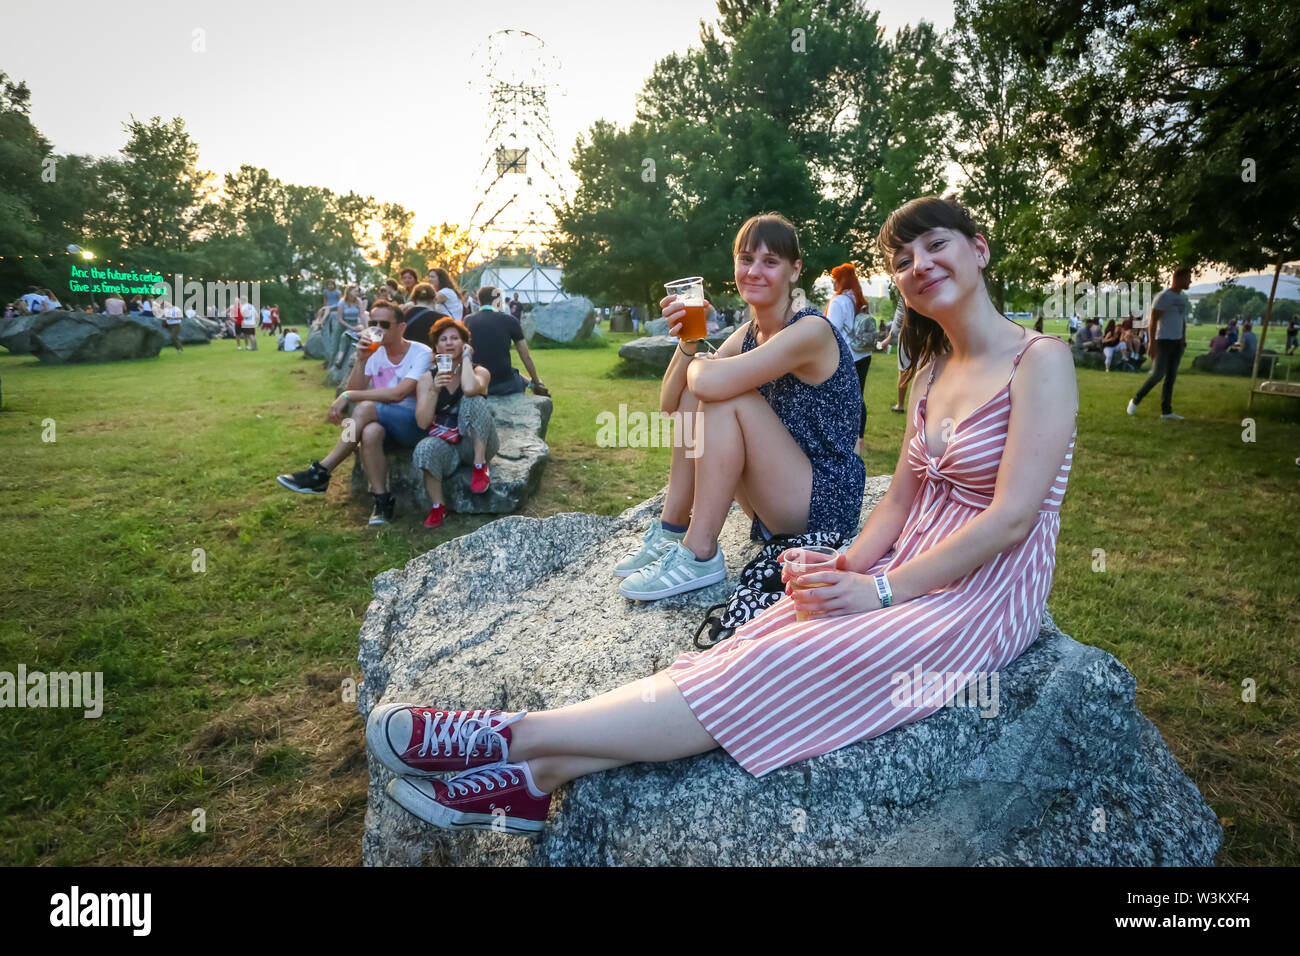 Zagreb, Croatia - 25th June, 2019 : Atmosphere during 2nd day of the 14th INmusic festival located on the lake Jarun in Zagreb, Croatia. People restin Stock Photo